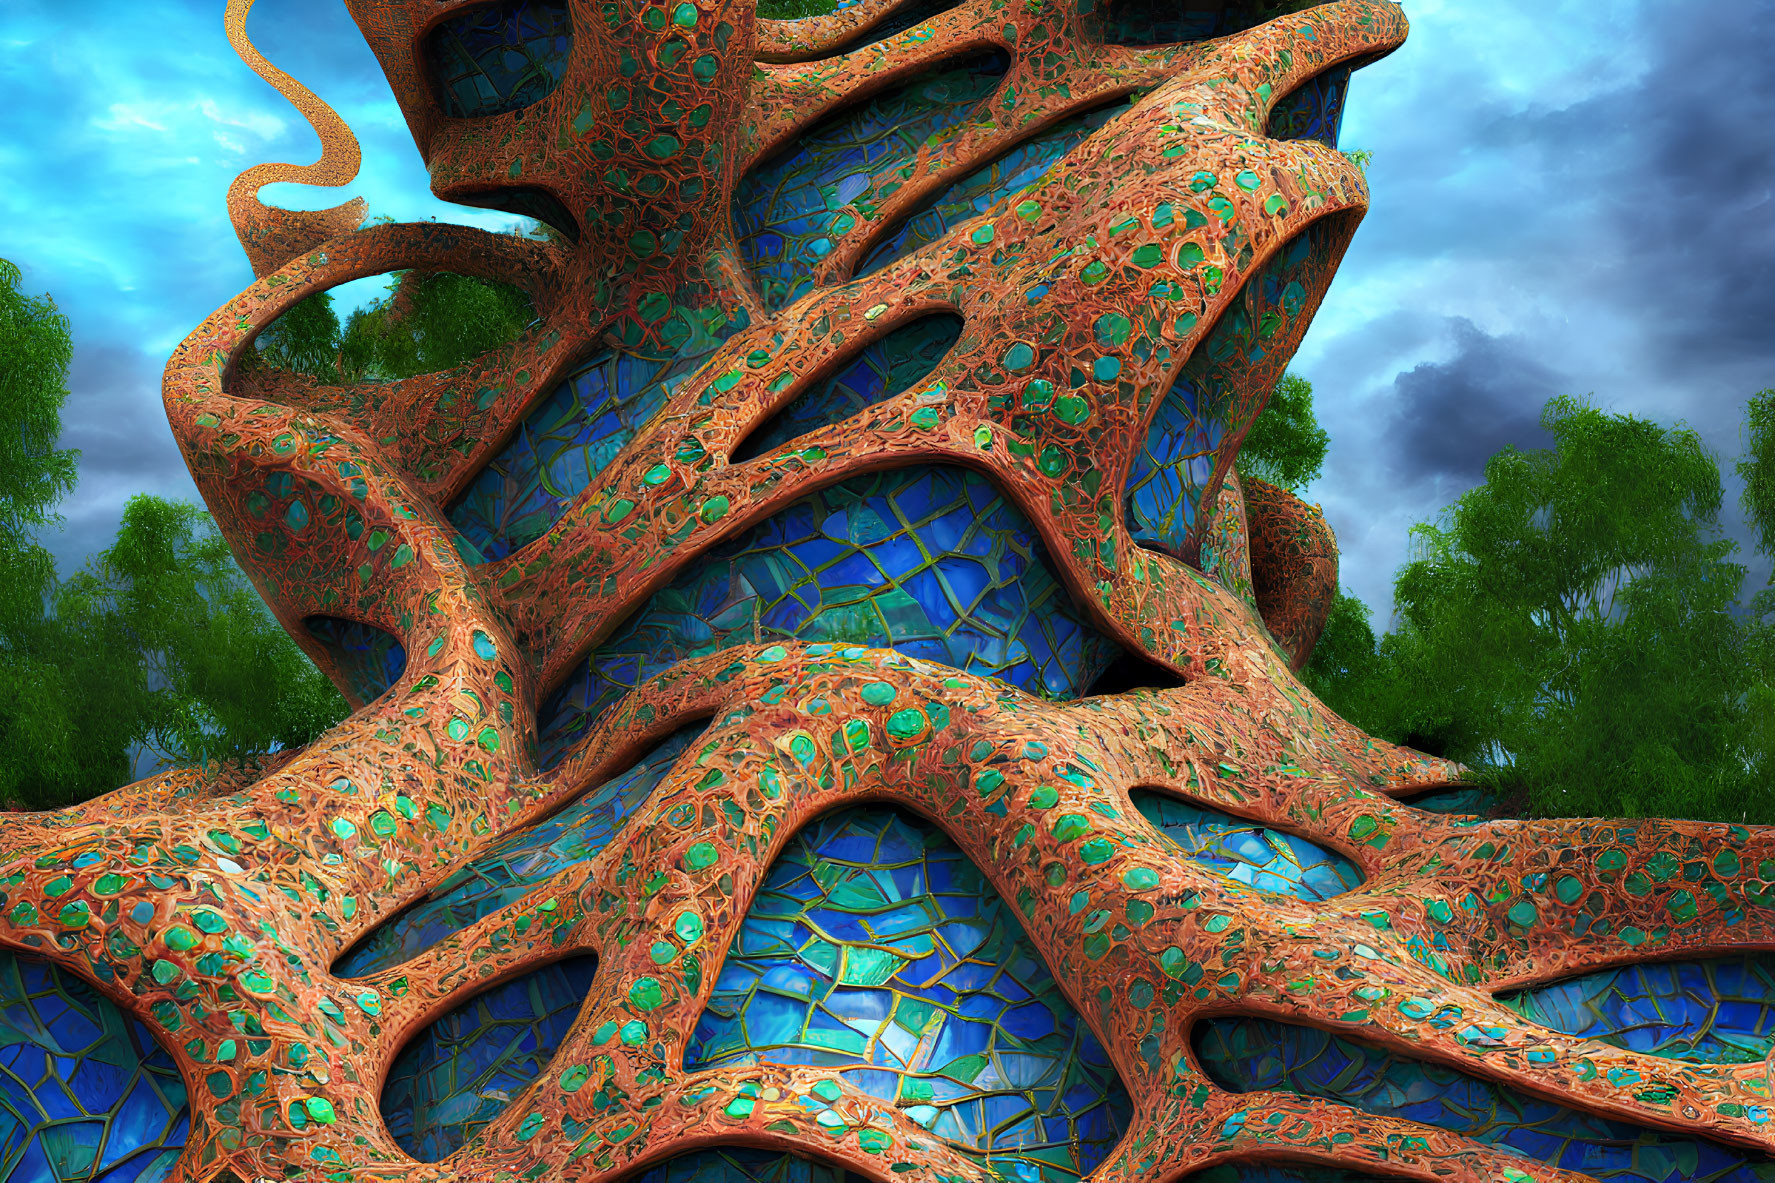 Orange and Blue Fractal Art with Organic Structure